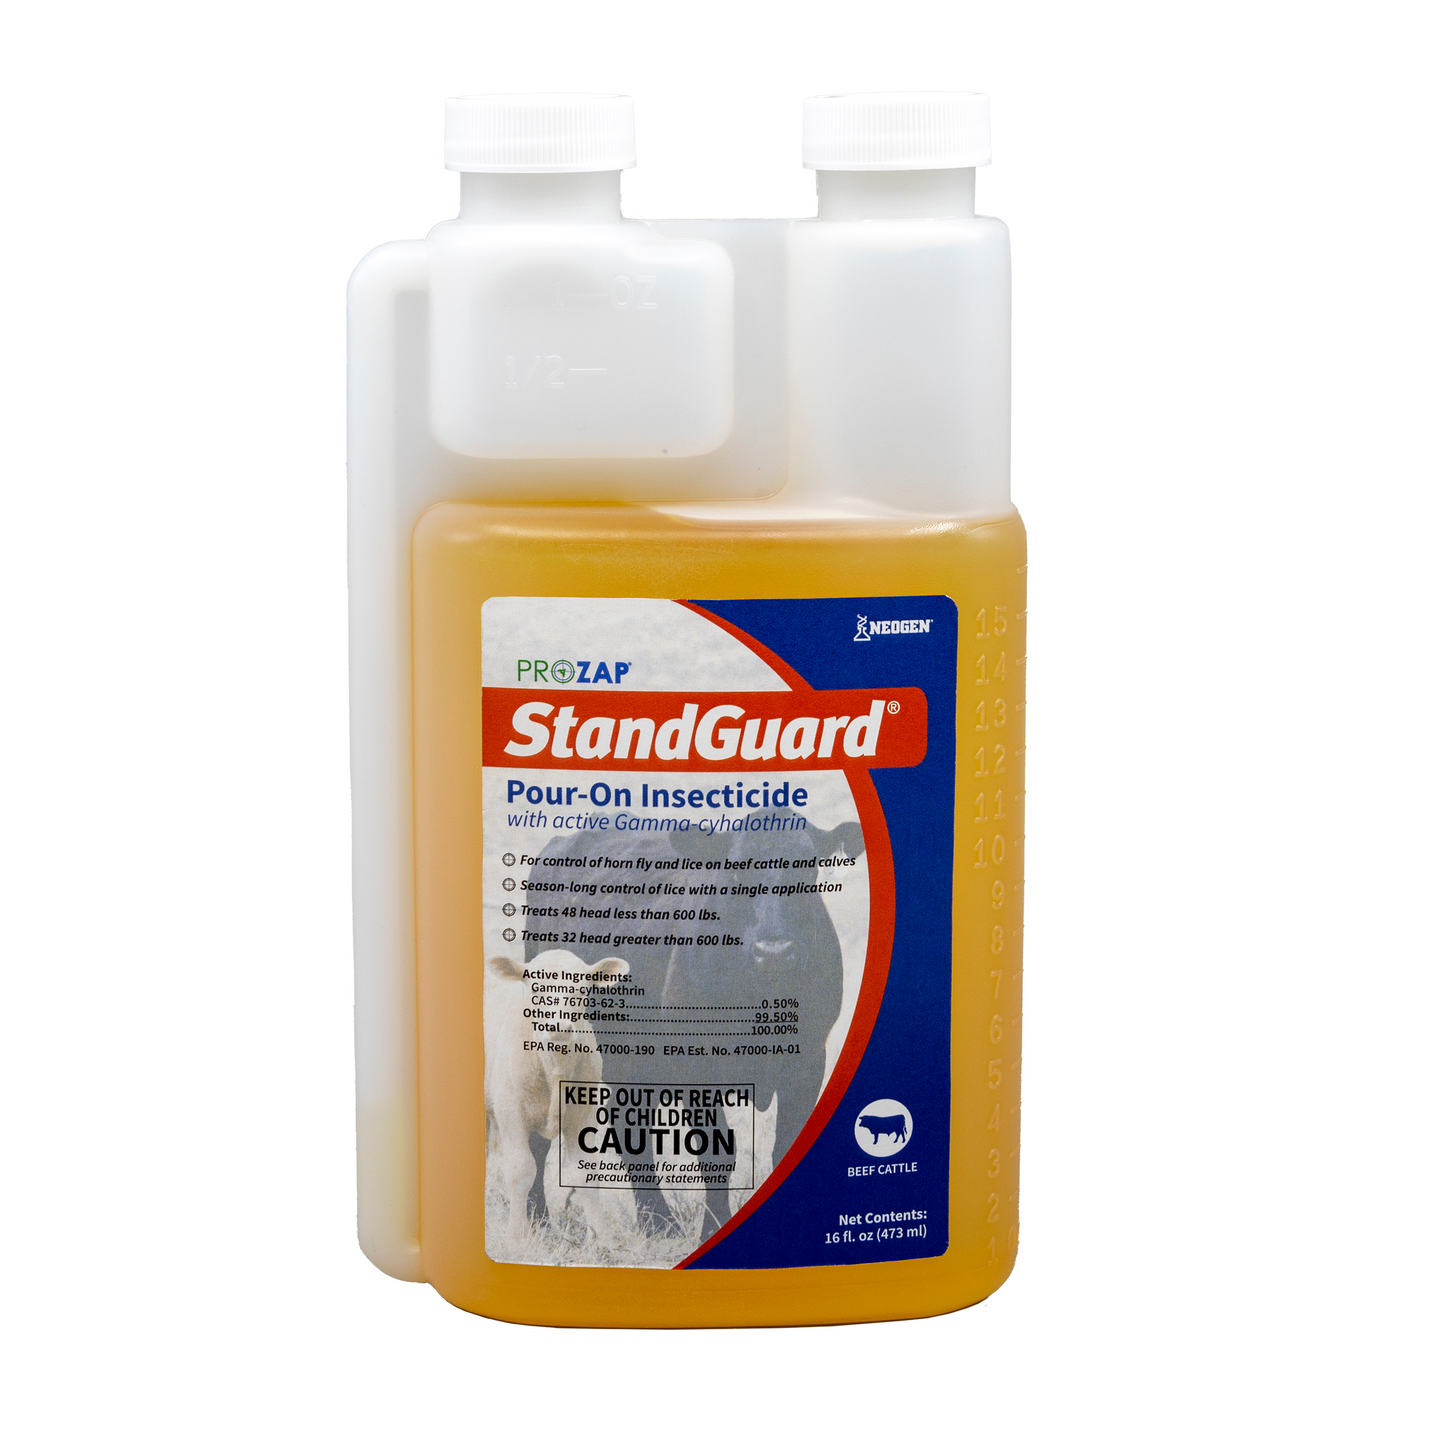 StandGaurd Pour-On Insecticide